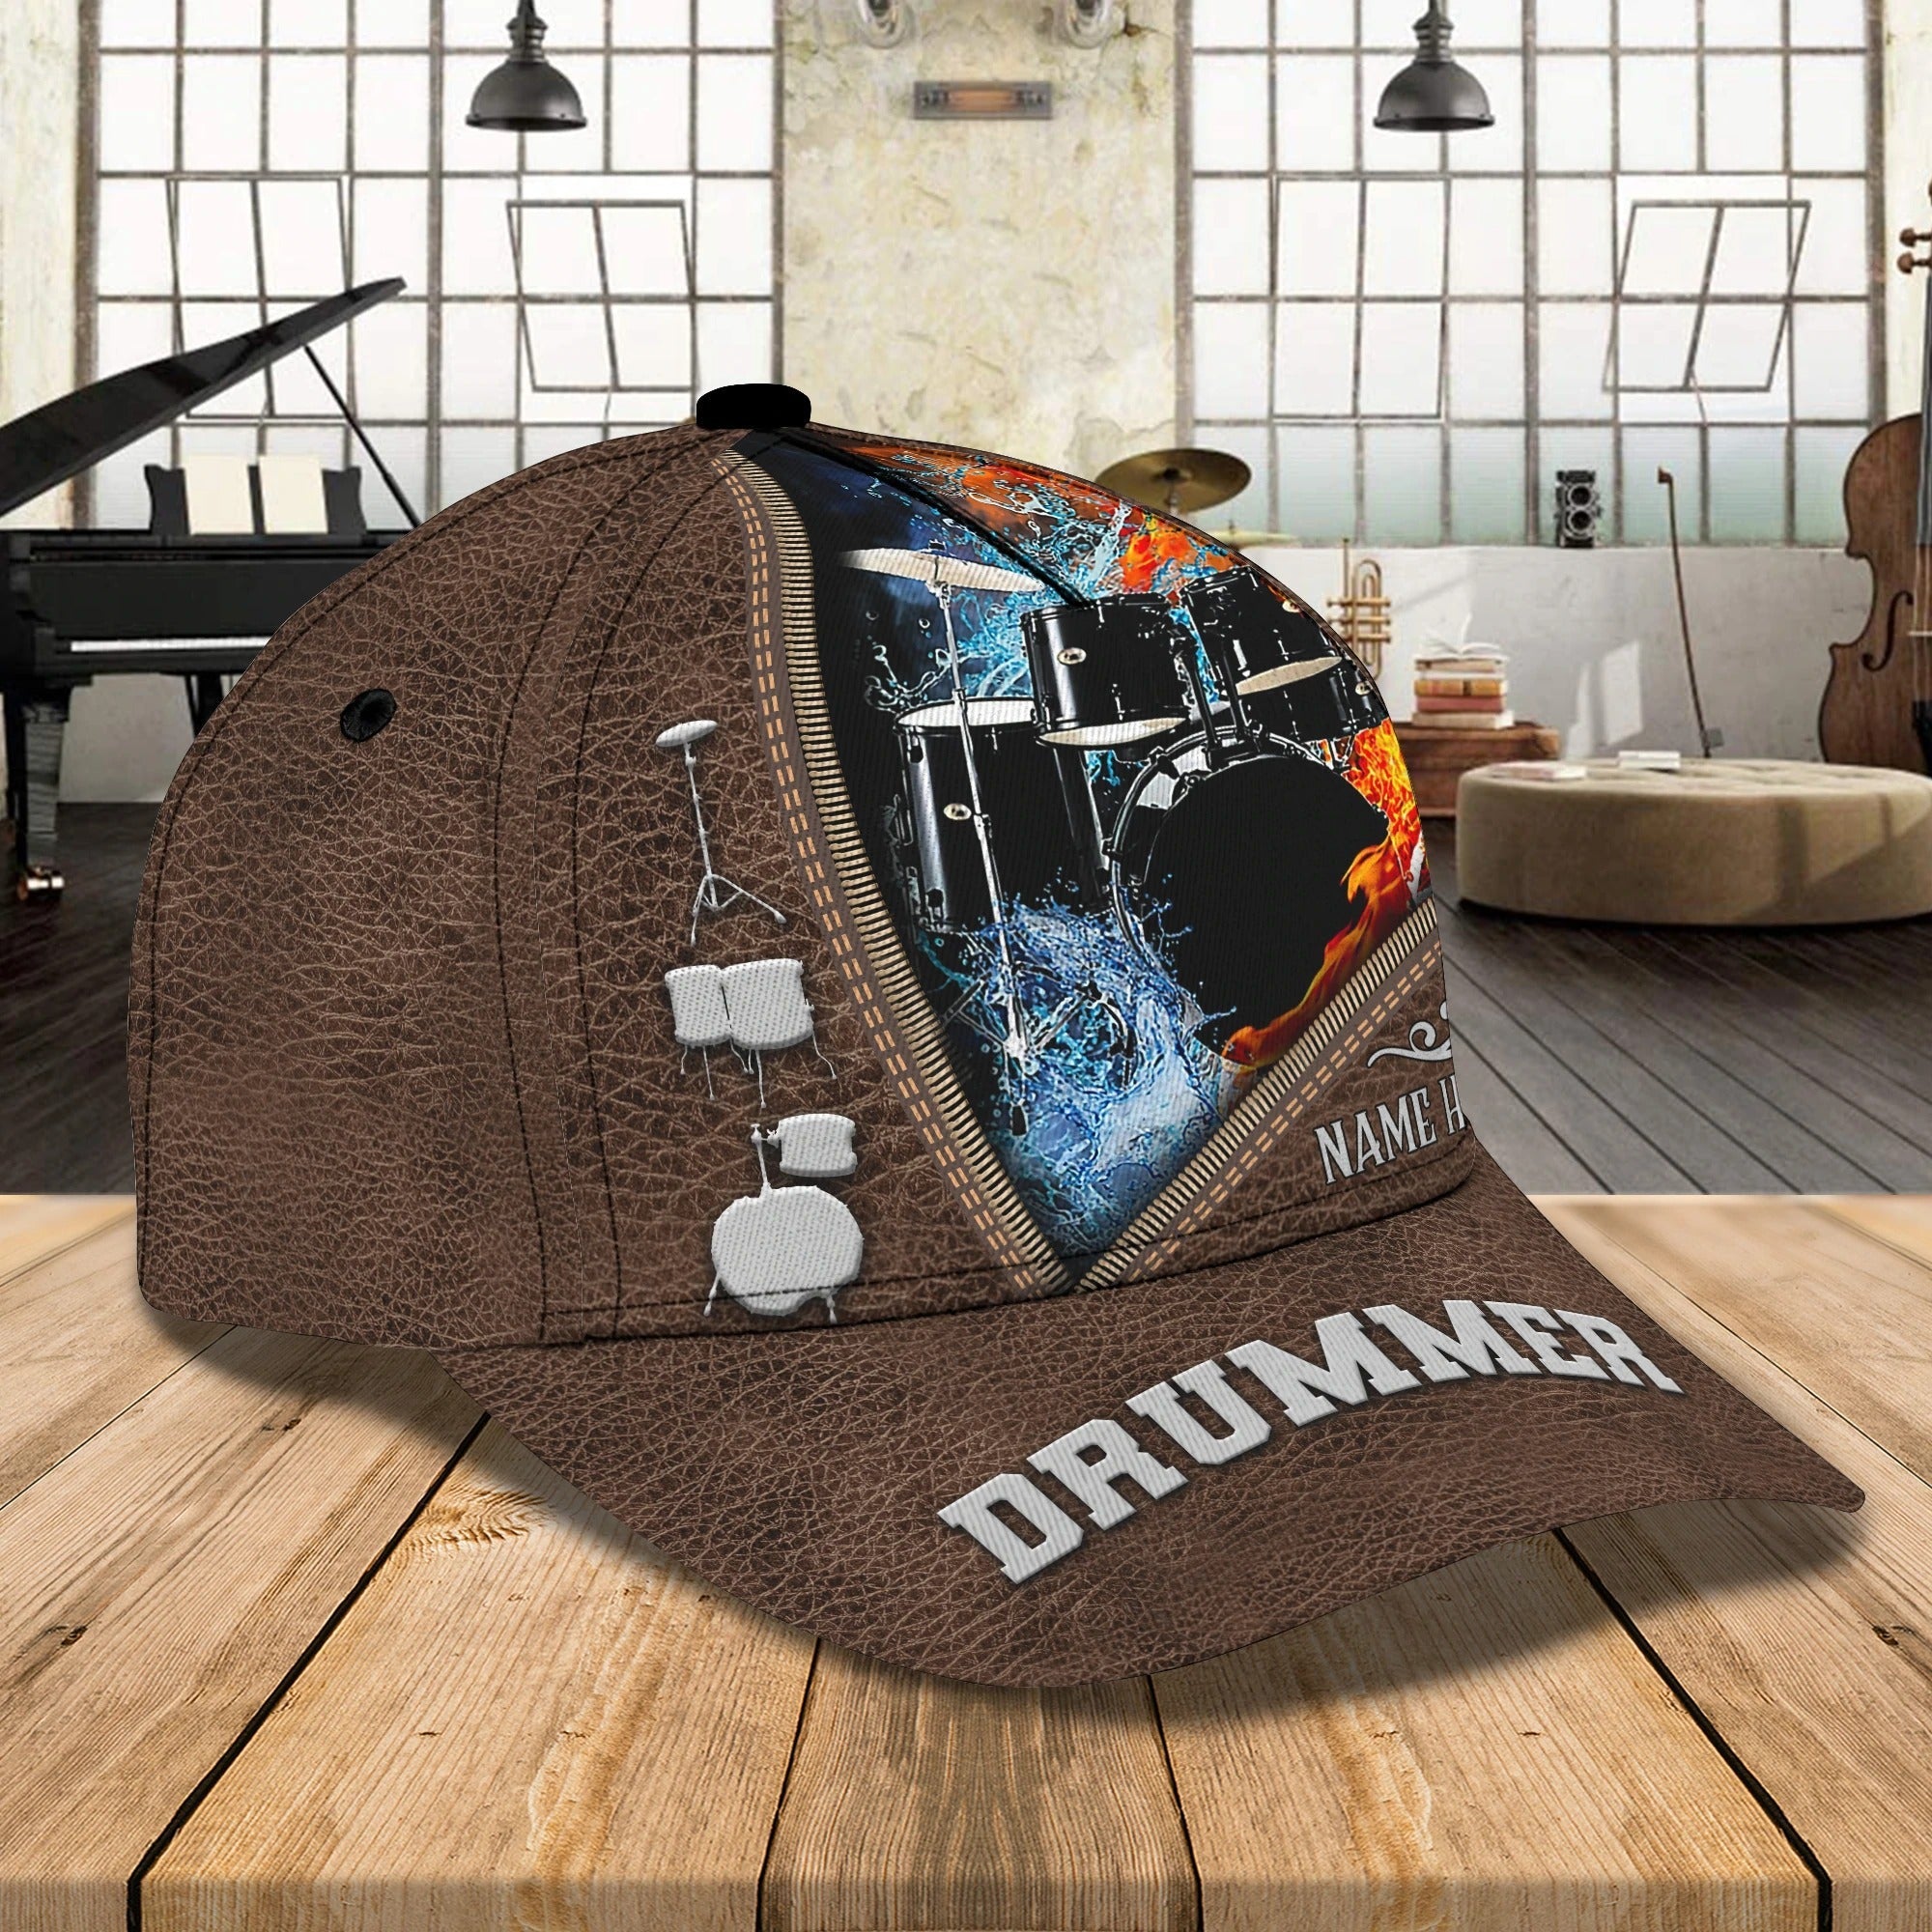 Personalized Drum Baseball Cap For Man And Woman/ Birthday Present To Drummer/ Drummer Summer Cap Hat